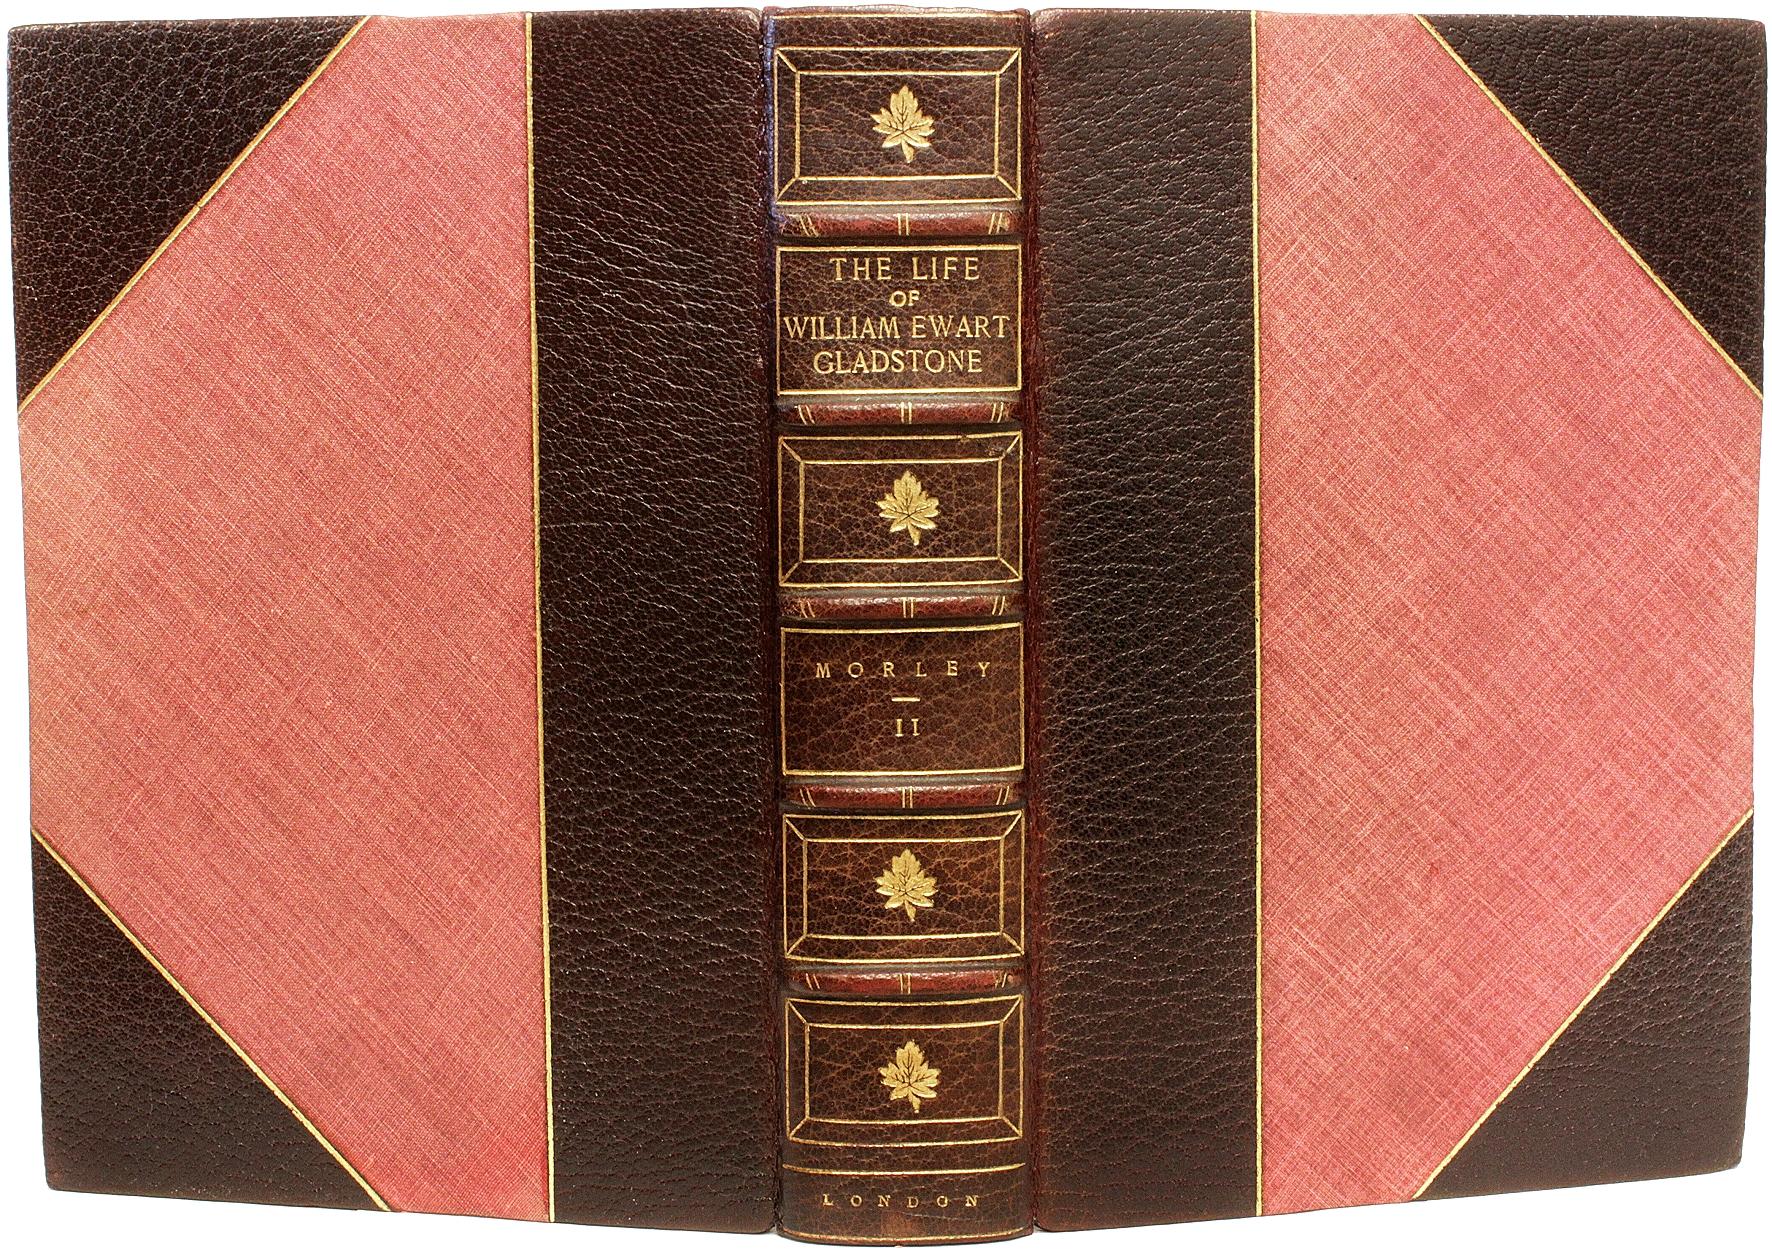 American John MORLEY. The Life Of William Ewart Gladstone - 3 vols. - IN A FINE BINDING! For Sale